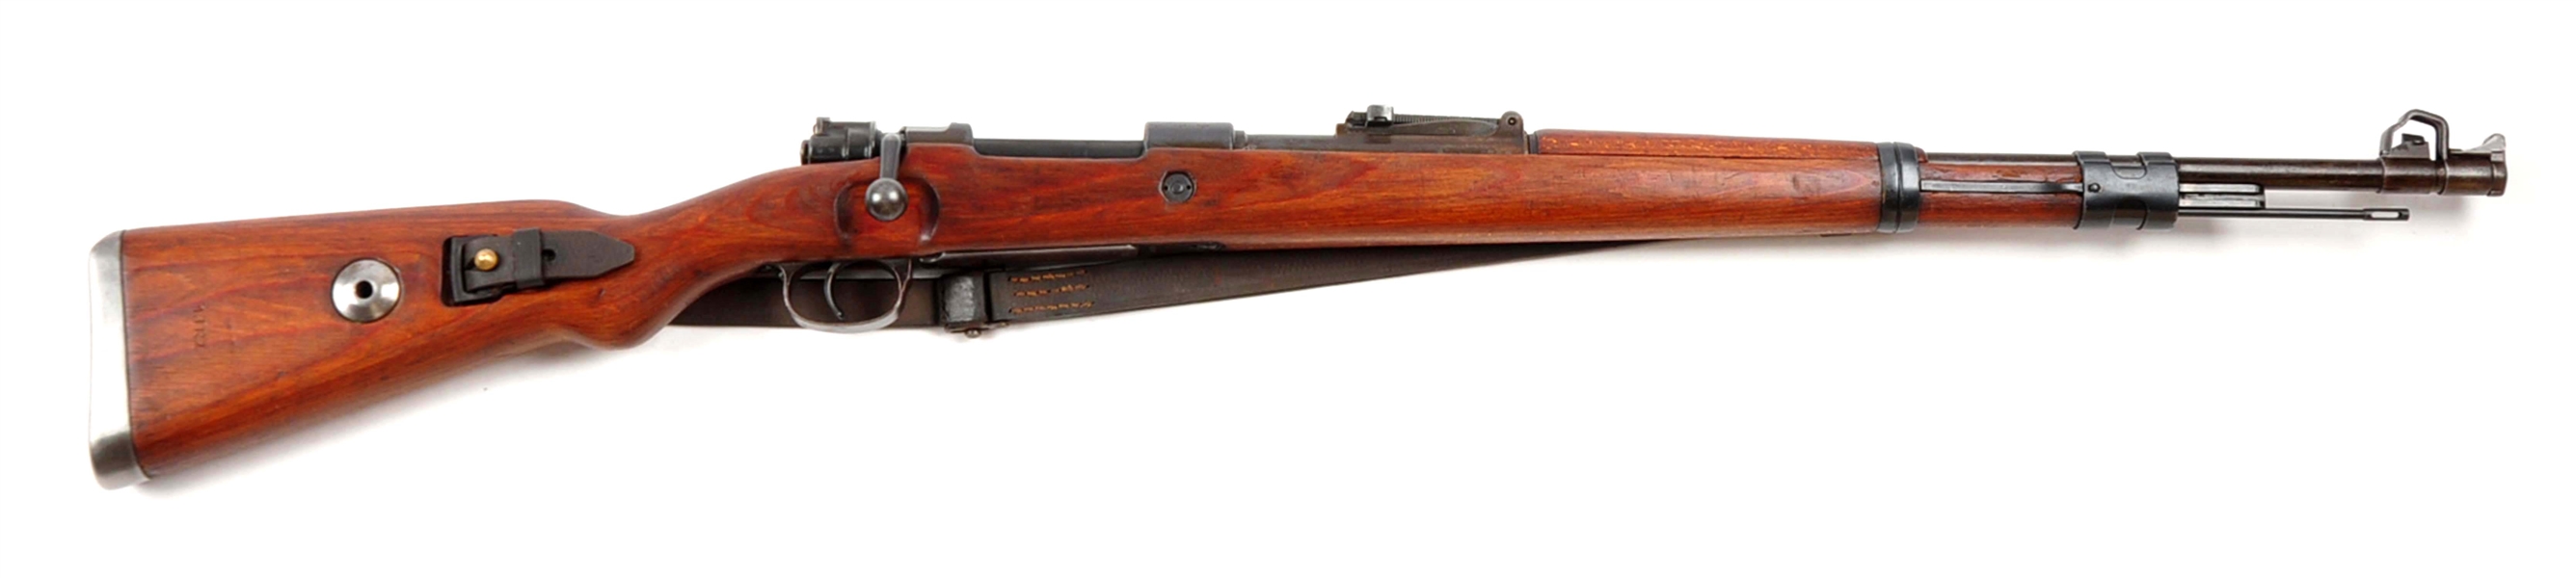 (C) EXCEPTIONAL MATCHING GERMAN MAUSER 98 RIFLE.